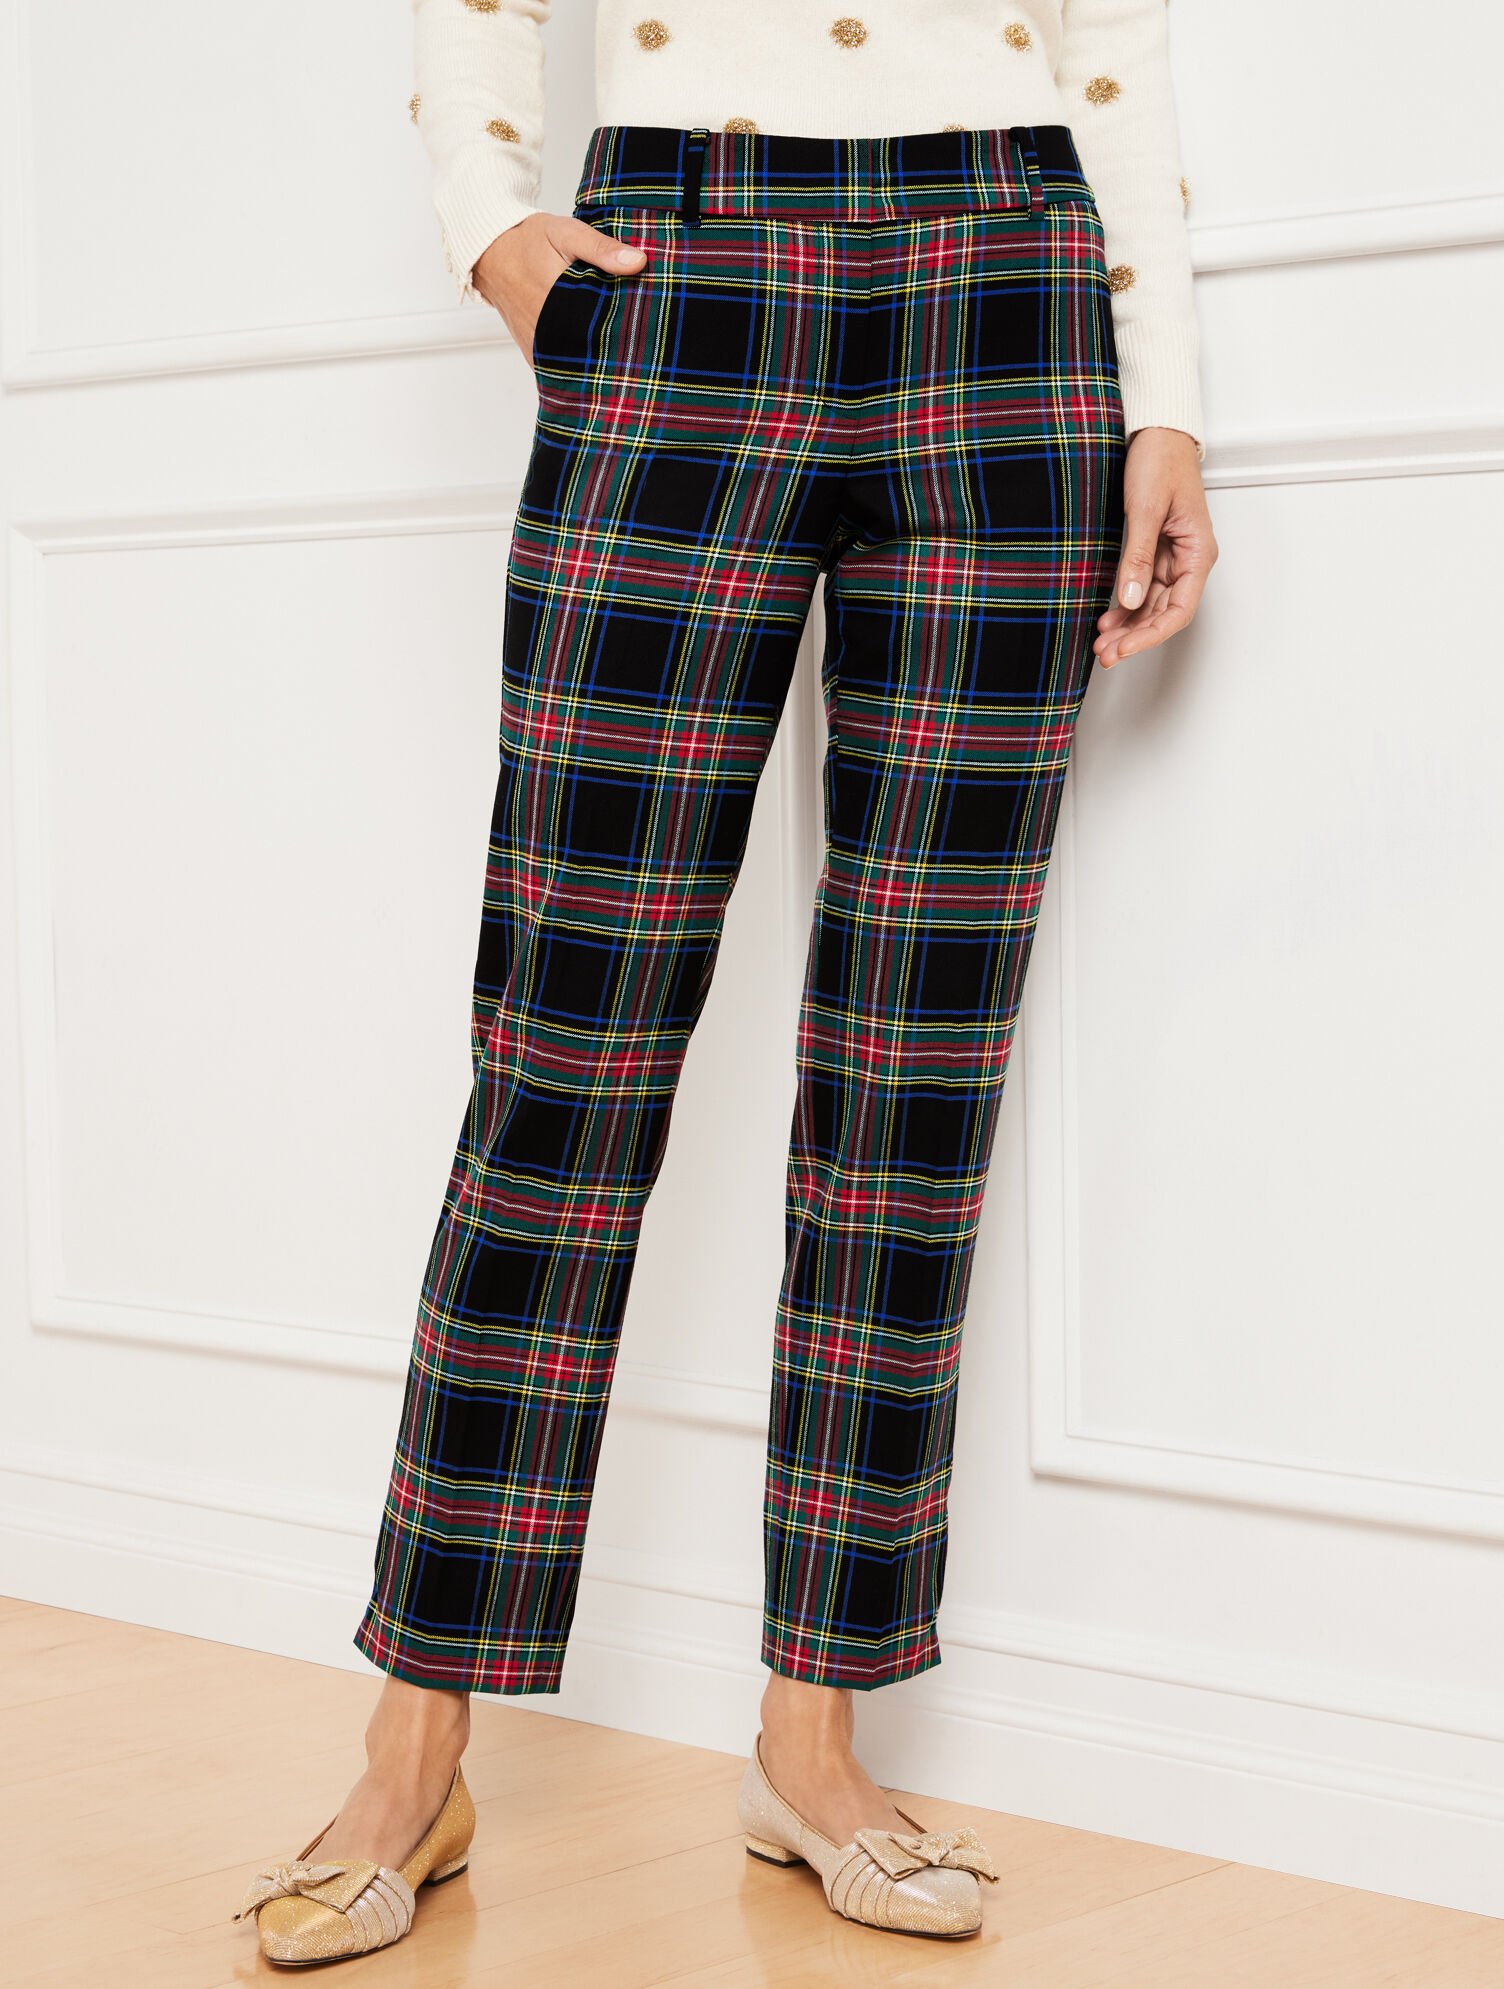 Talbots Hampshire Ankle Pants - Fresh Houndstooth